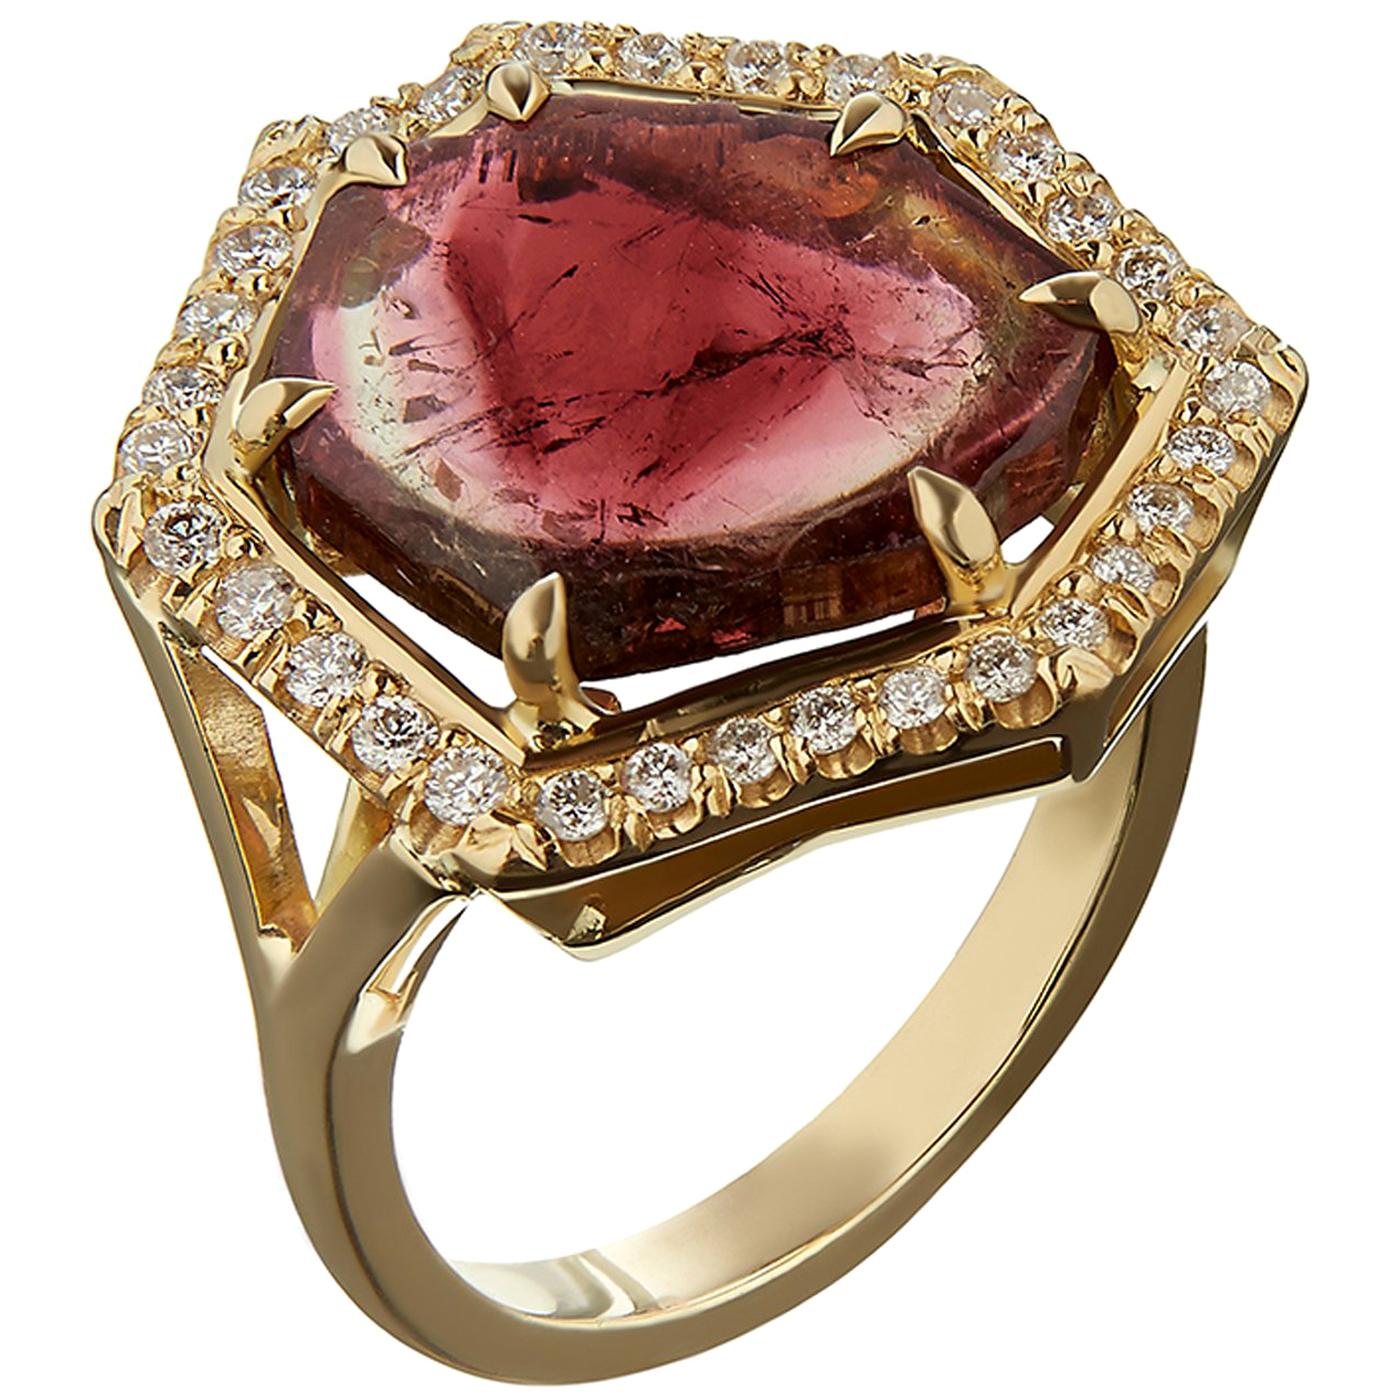 18ct Yellow Gold, Diamond and Watermelon Tourmaline Slice Cocktail Ring For Sale